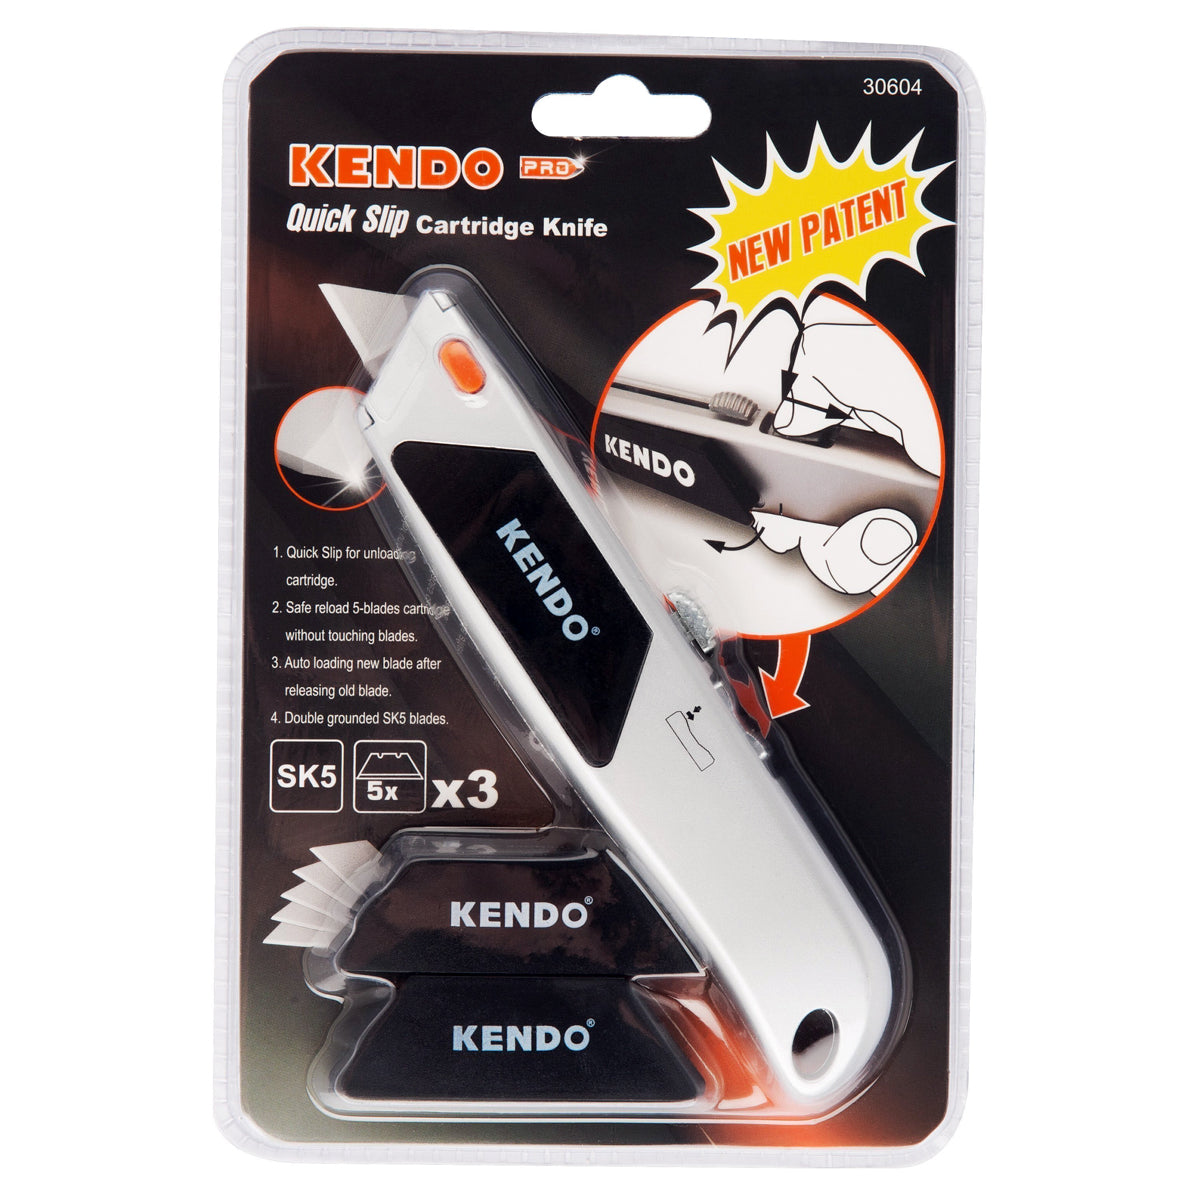 Kendo Quick Slip Cartridge Knife with 15 Piece Blade